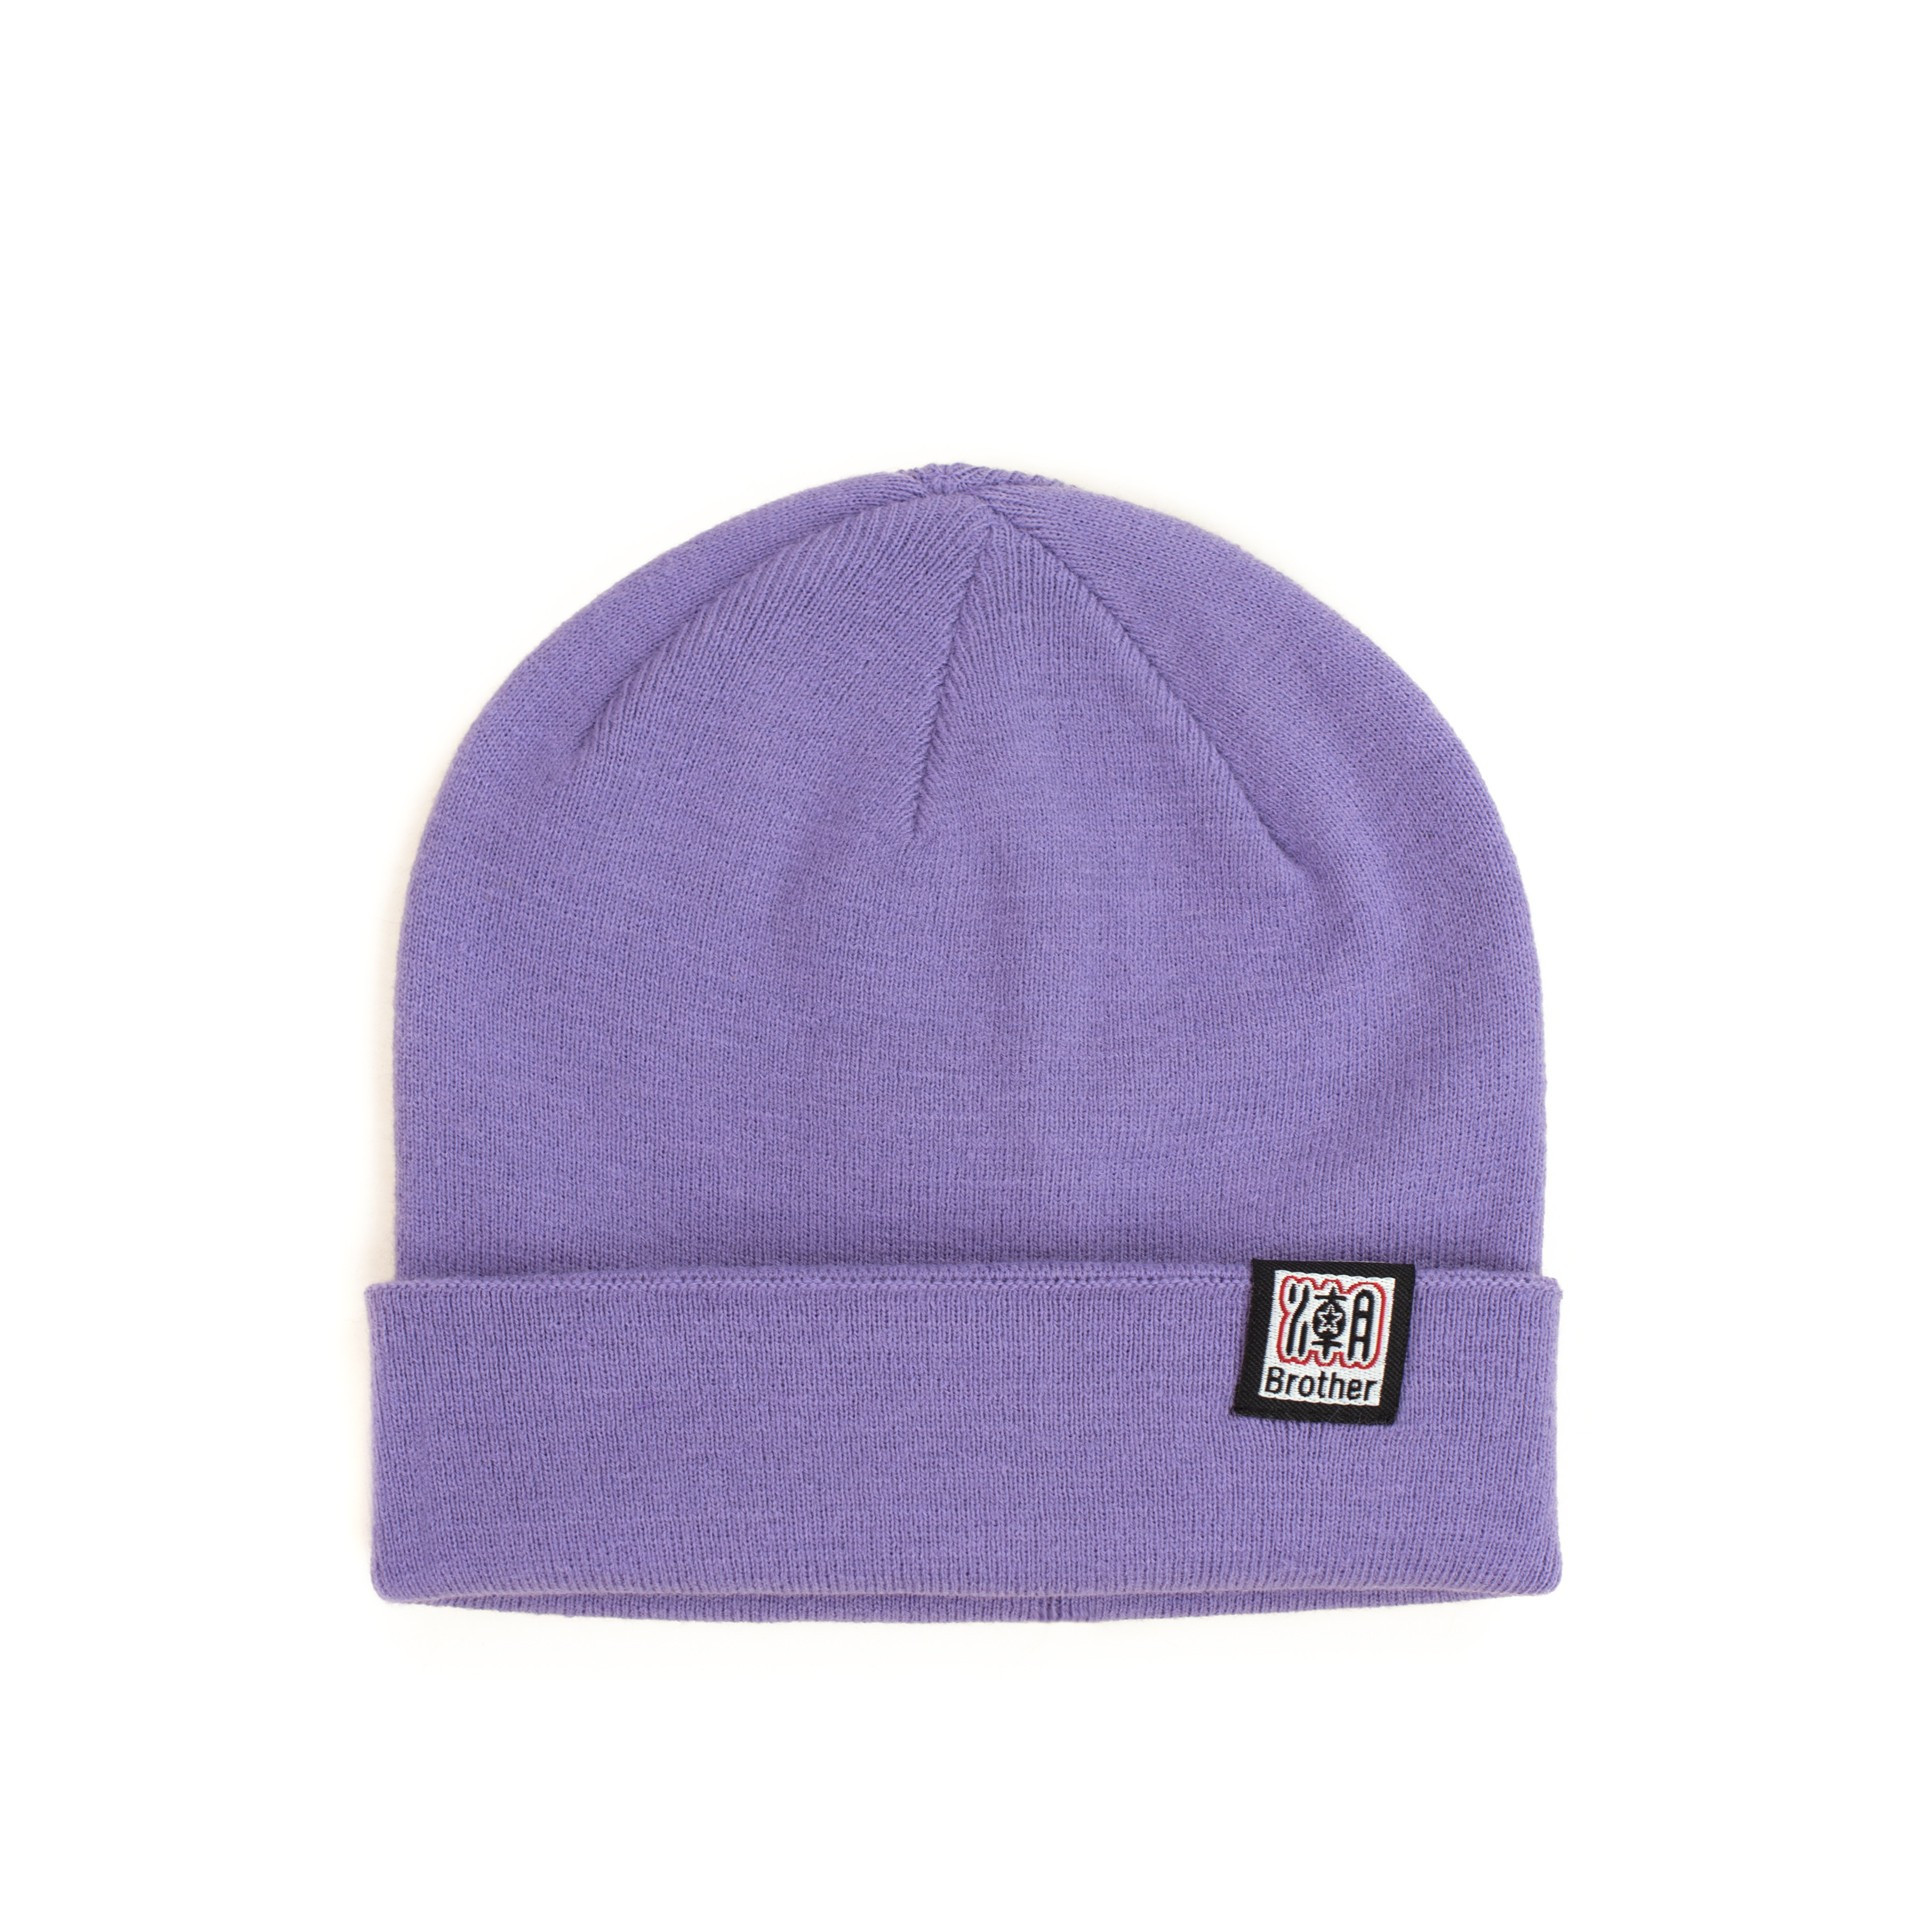 Art Of Polo Hat cz21322 Lavender OS